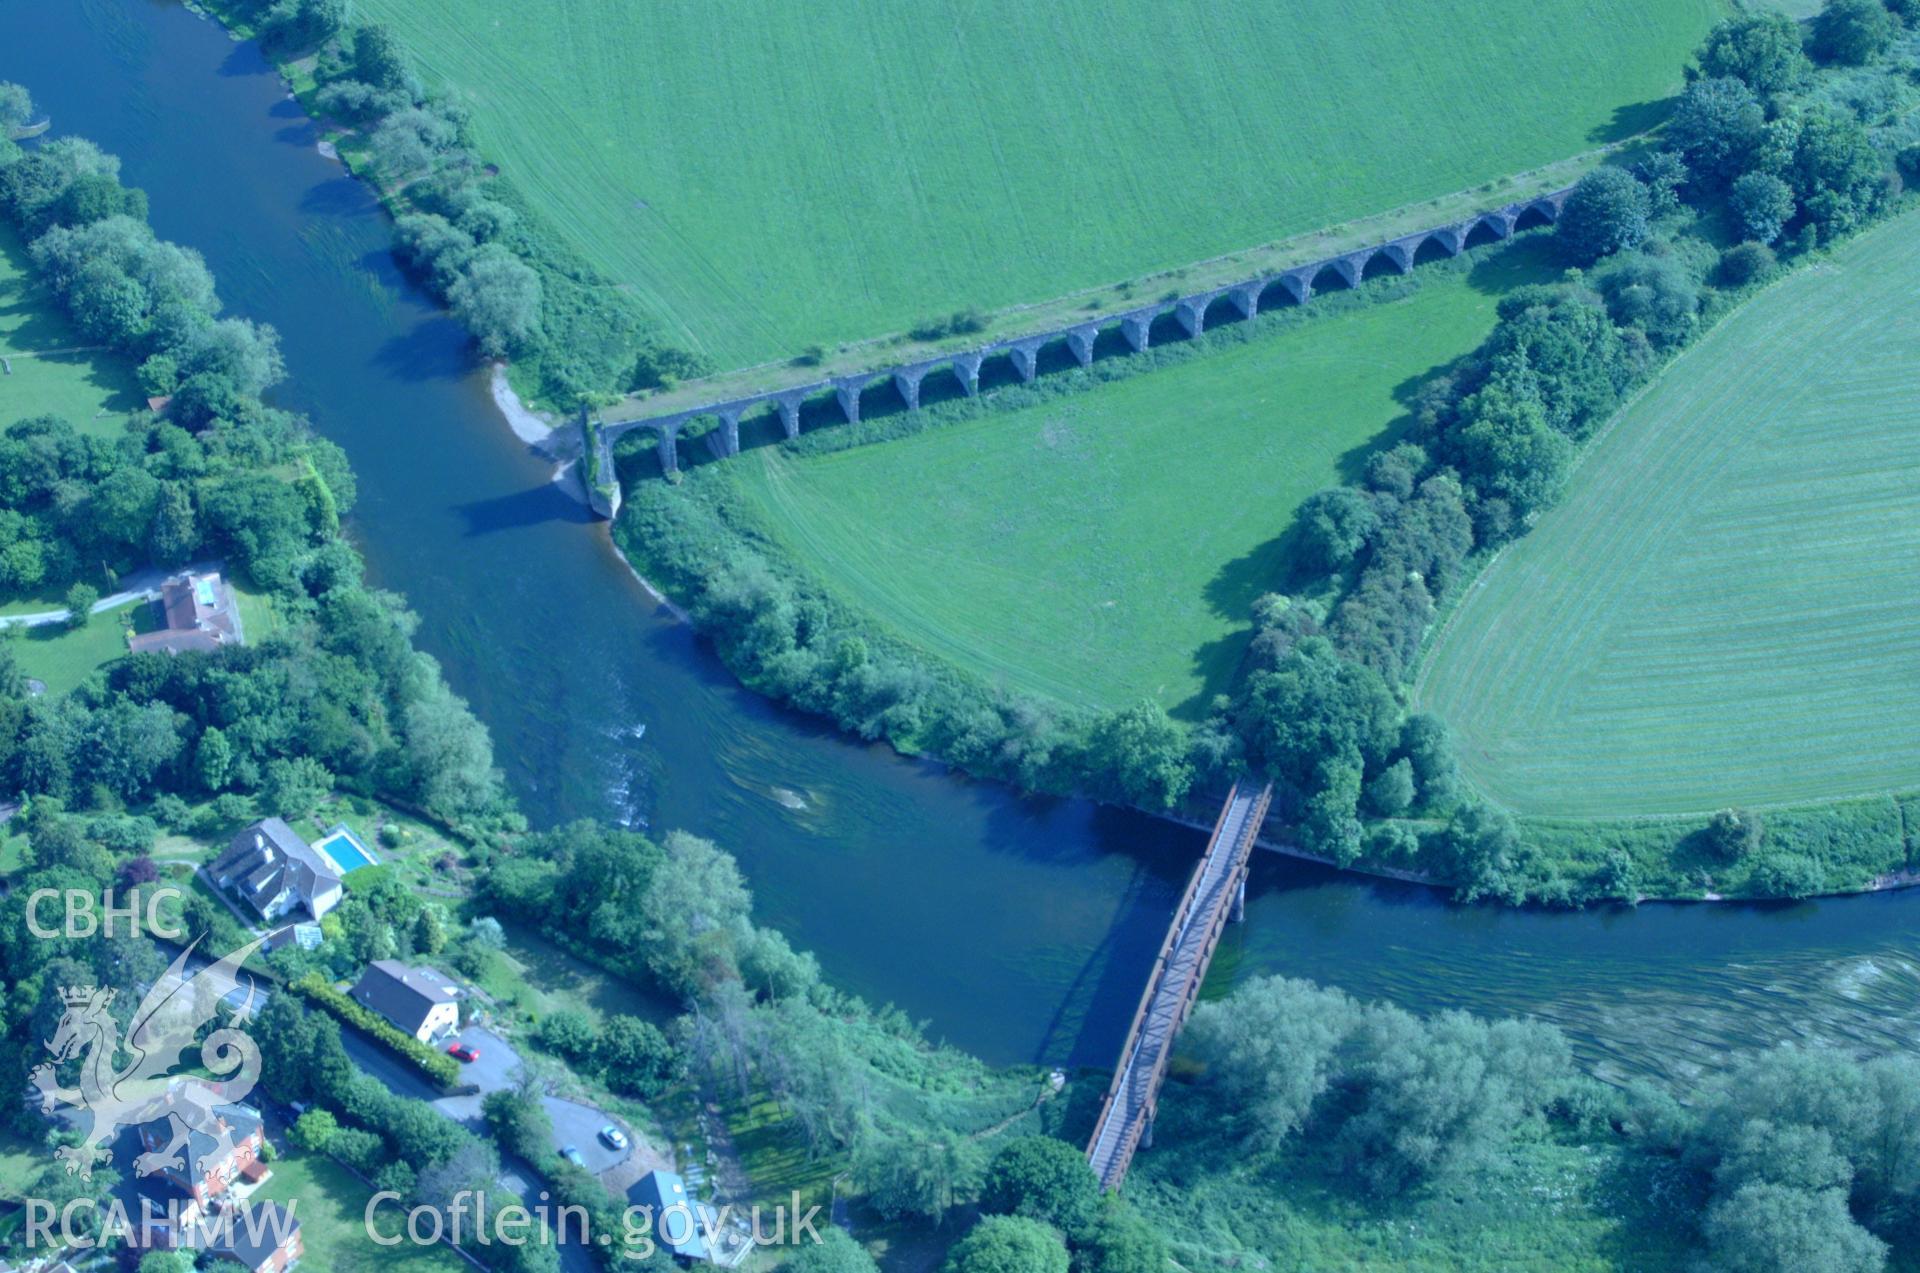 RCAHMW colour oblique aerial photograph of the Wye Railway Viaduct, Monmouth taken on 02/06/2004 by Toby Driver